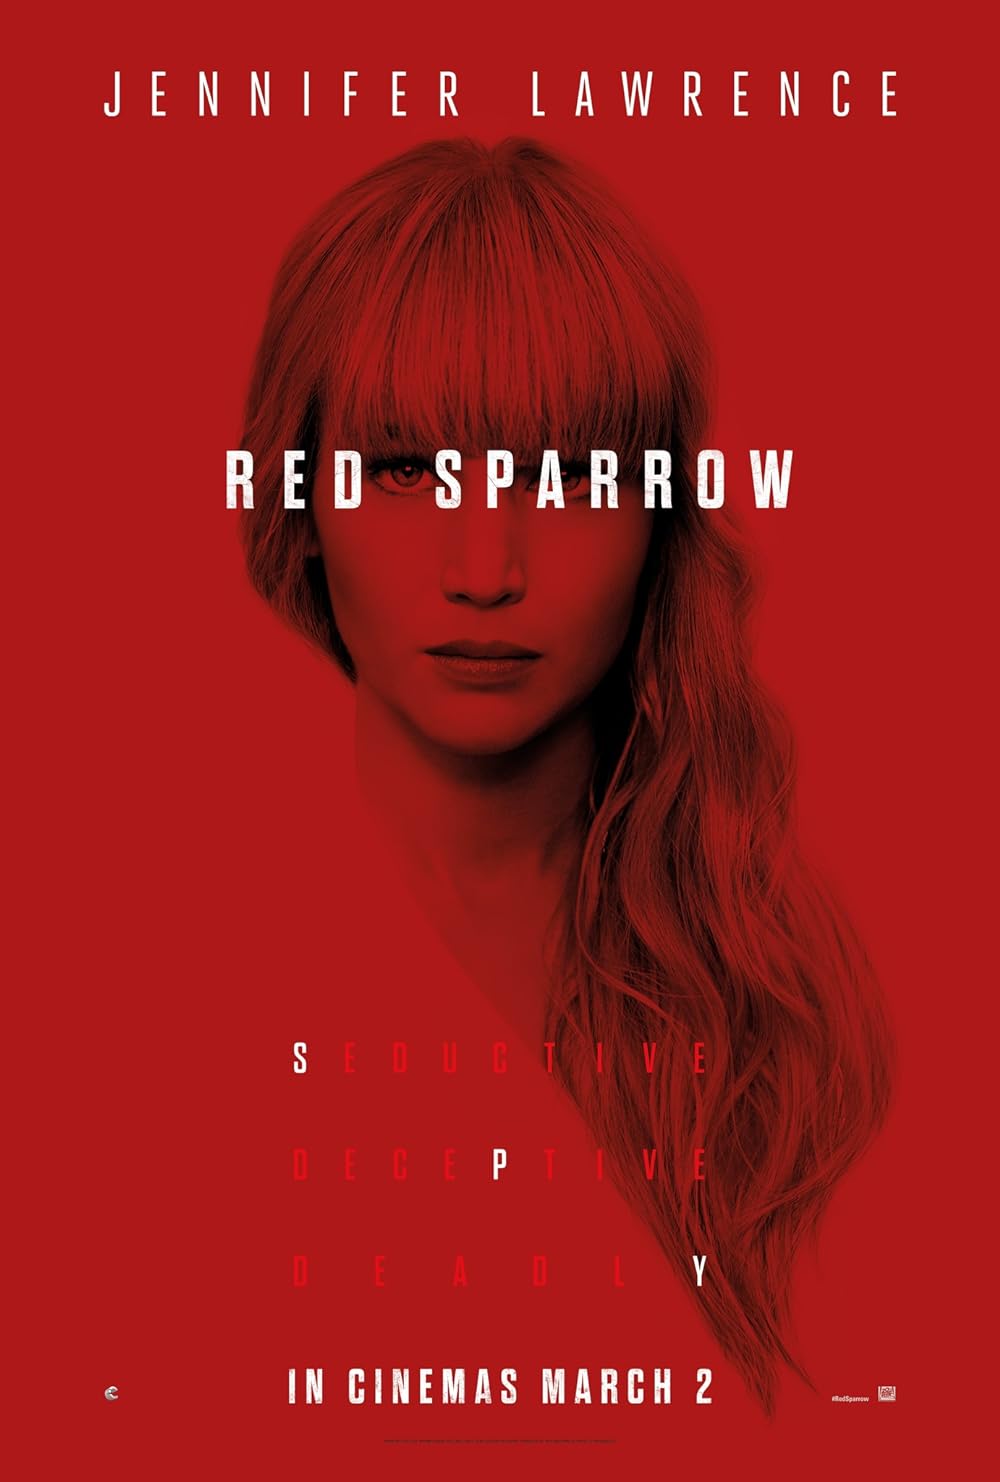 FULL MOVIE: Red Sparrow (2018)